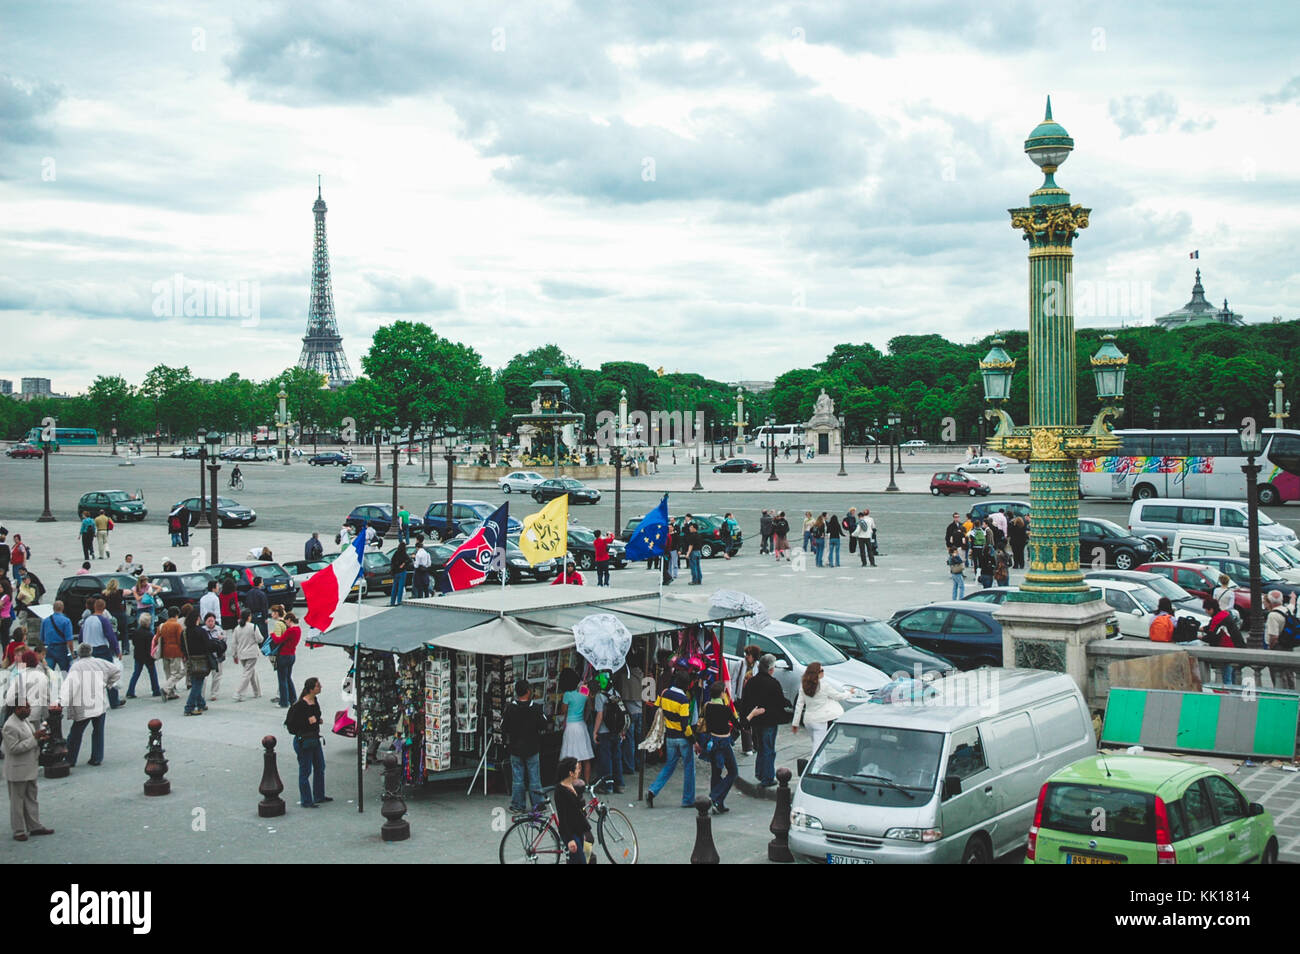 Historic Place de la Concorde is one of the major public squares in Paris that adjoins the Tuilerie gardens famous for its role in French Revolution Stock Photo